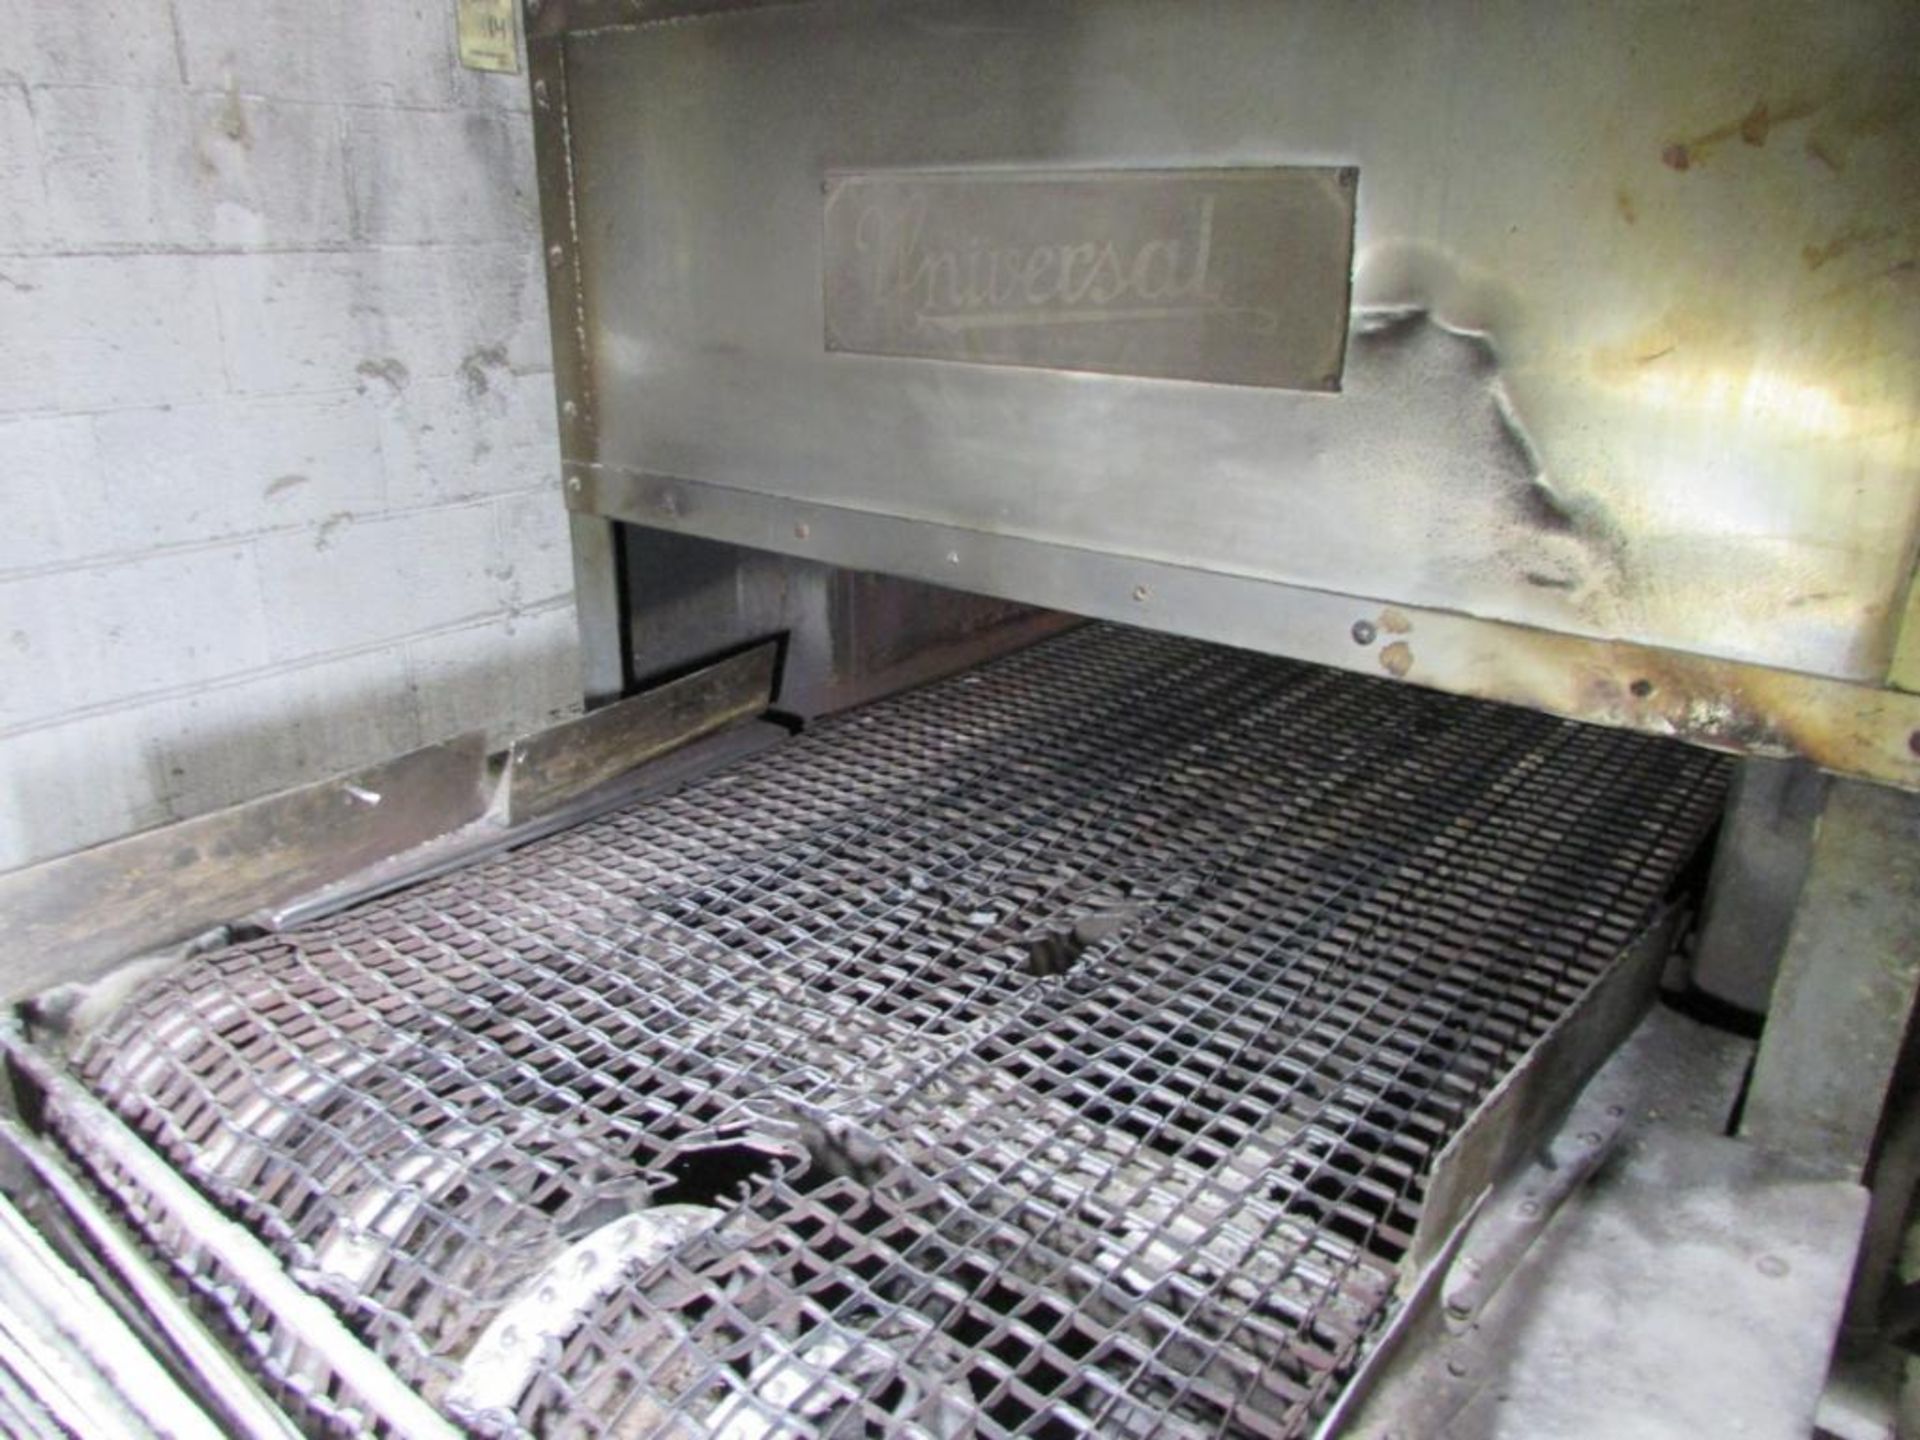 Universal 50'x3' Natural Gas Conveyor Tunnel Oven - Image 13 of 17